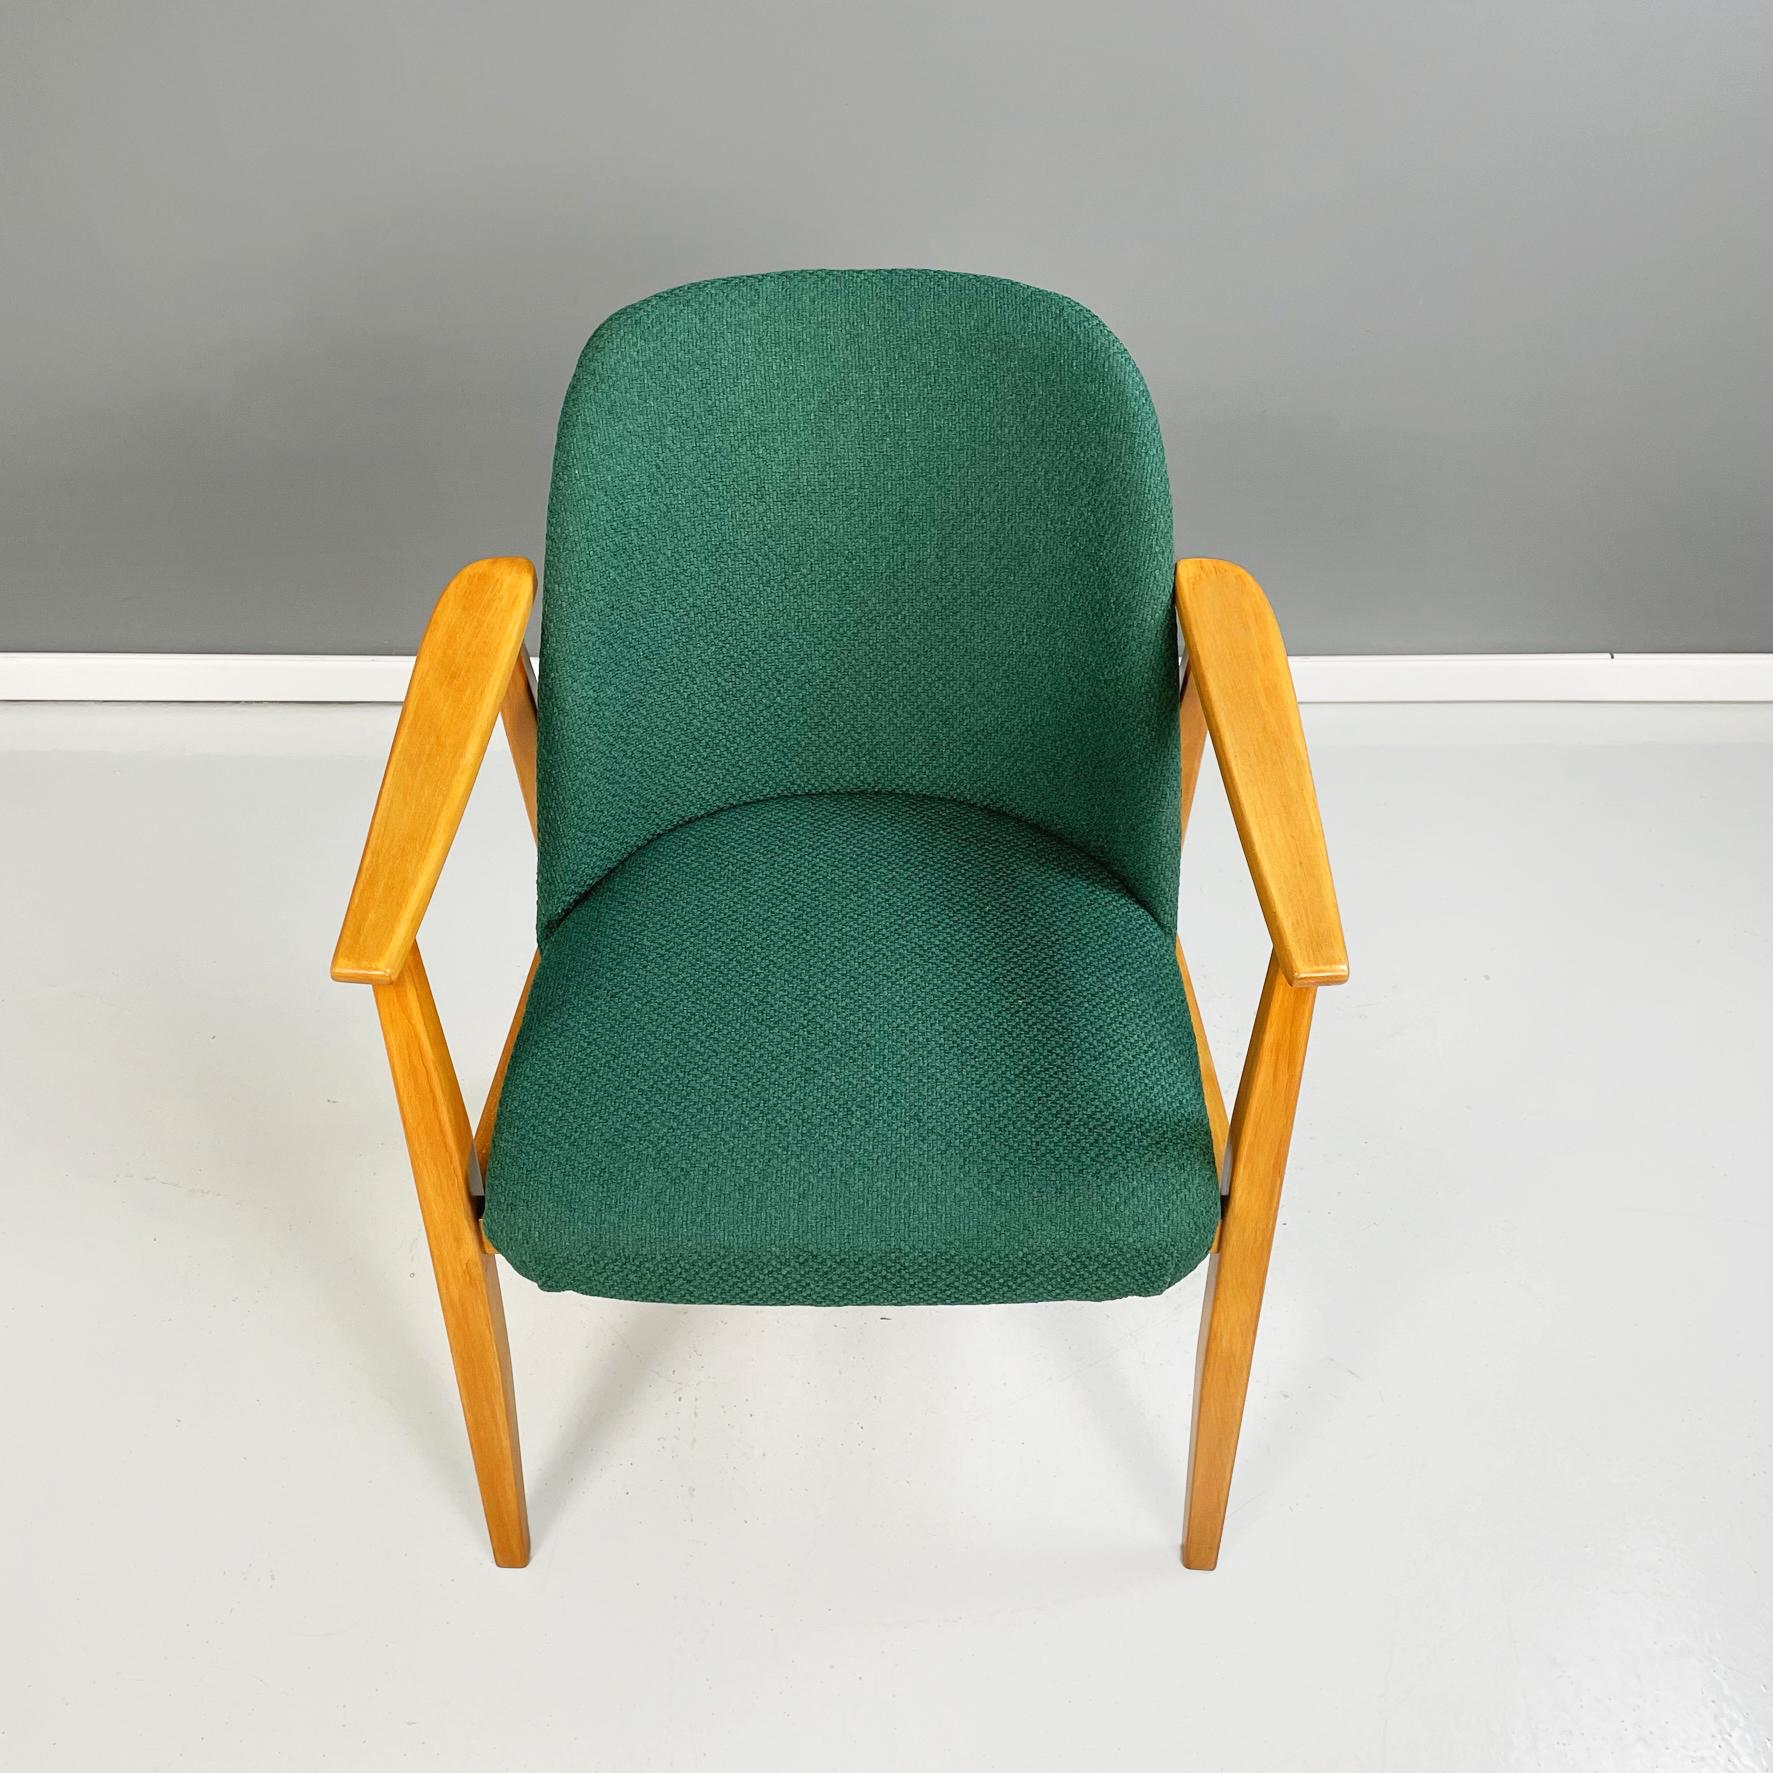 Danish Mid-Century Modern Armchairs in Forest Green Fabric and Wood, 1960s For Sale 4